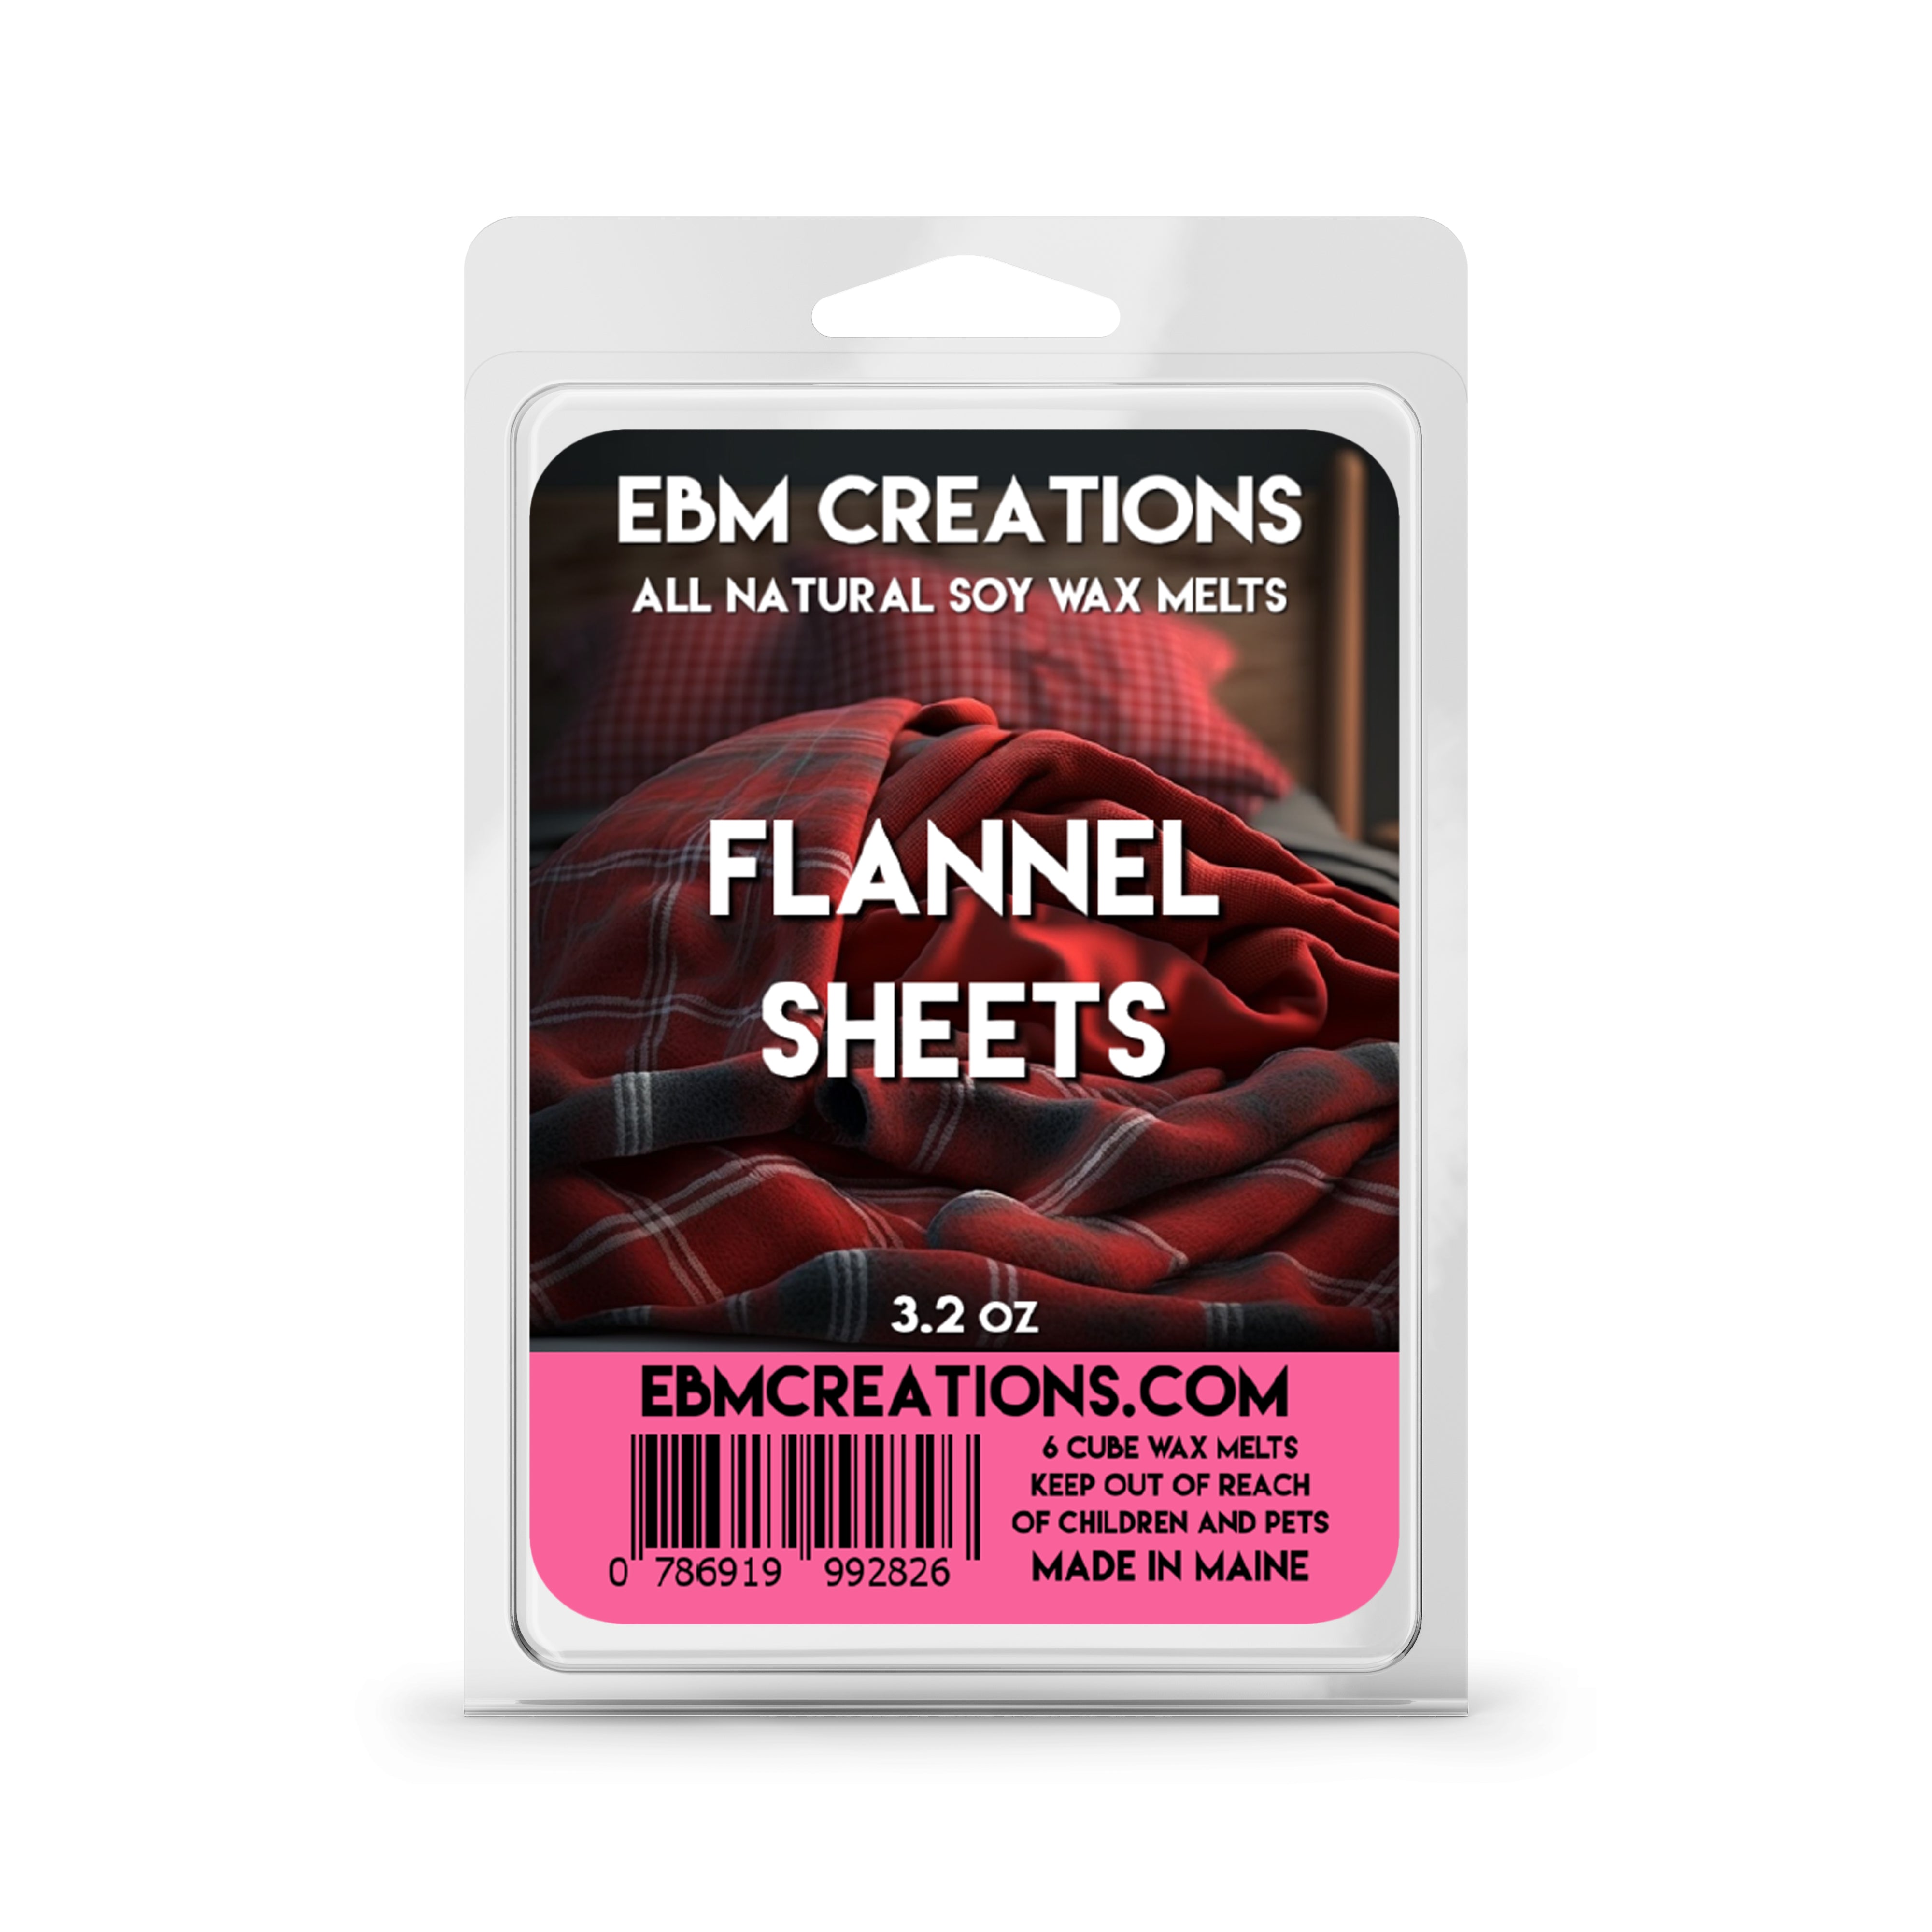 Flannel Sheets - 3.2 oz Clamshell